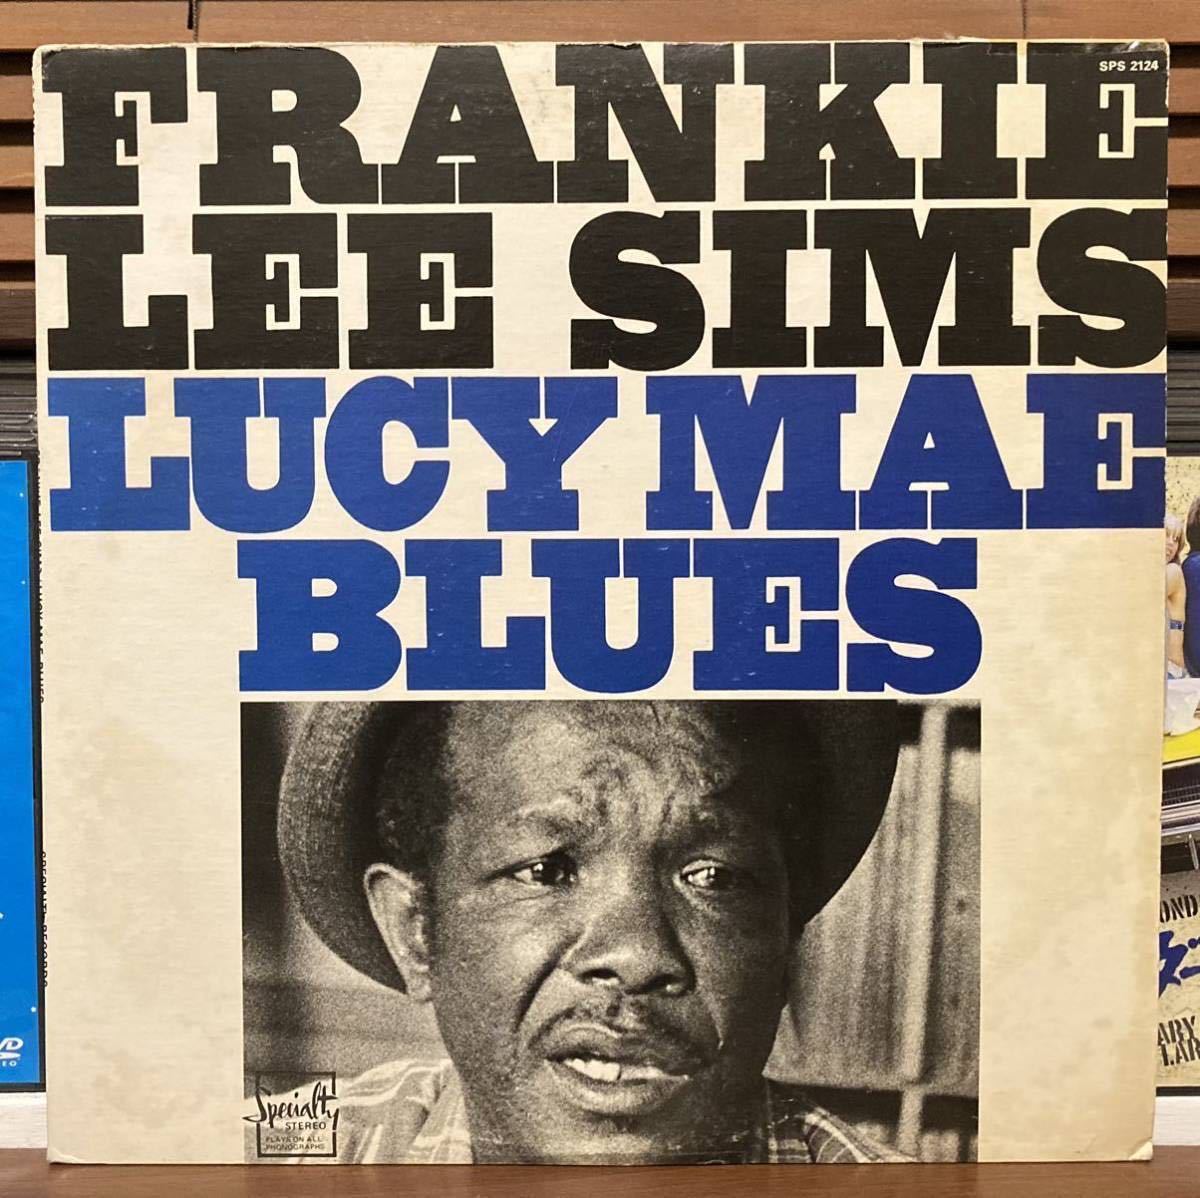 【FRANKIE LEE SIMS-Lucy Mae Blues】LP-70’s Rockin’ Blues R&B●Lucy Mae Blues Boogie Cross The Country ●50’s ロカビリー_画像1